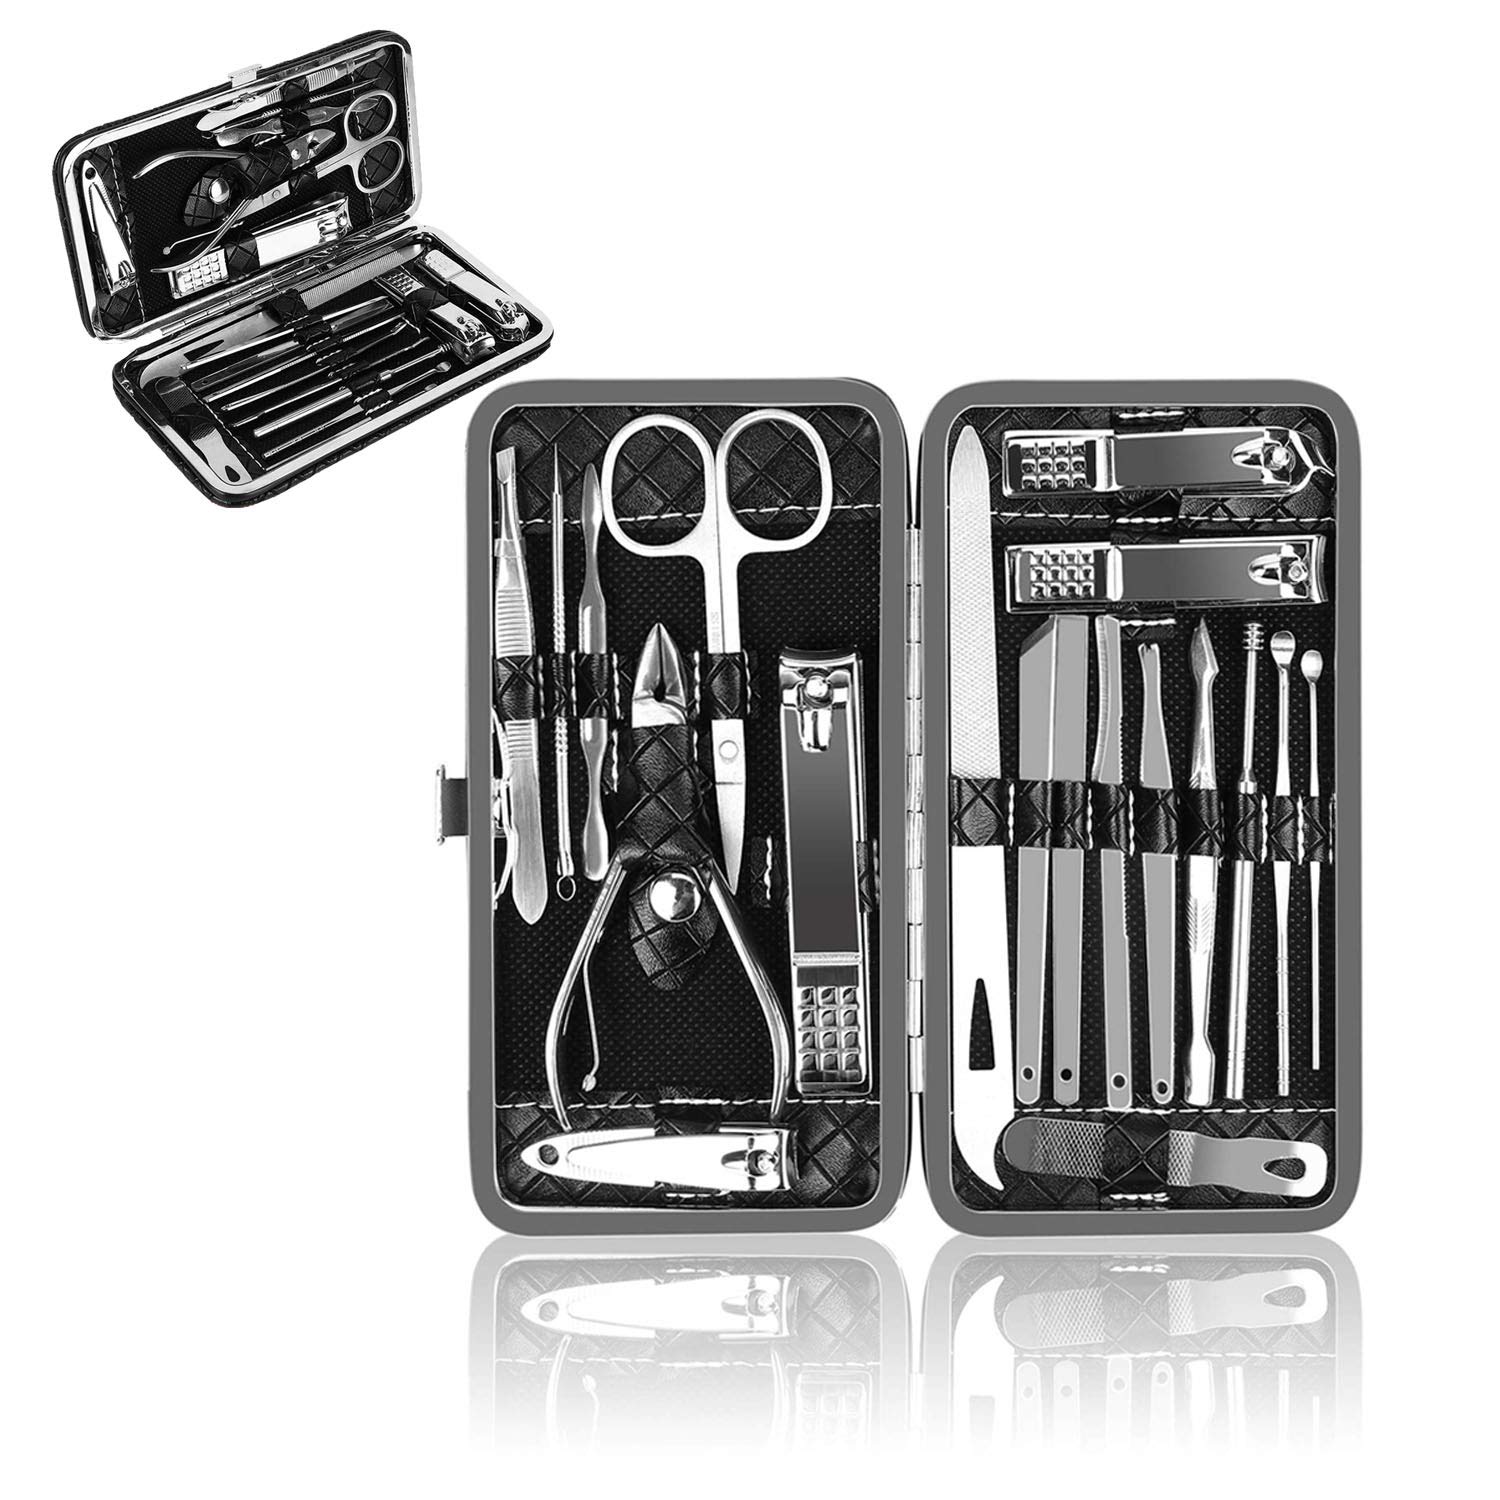 Men's Manicure Set & Nail Grooming Kit | The Shears 2.0 | MANSCAPED US